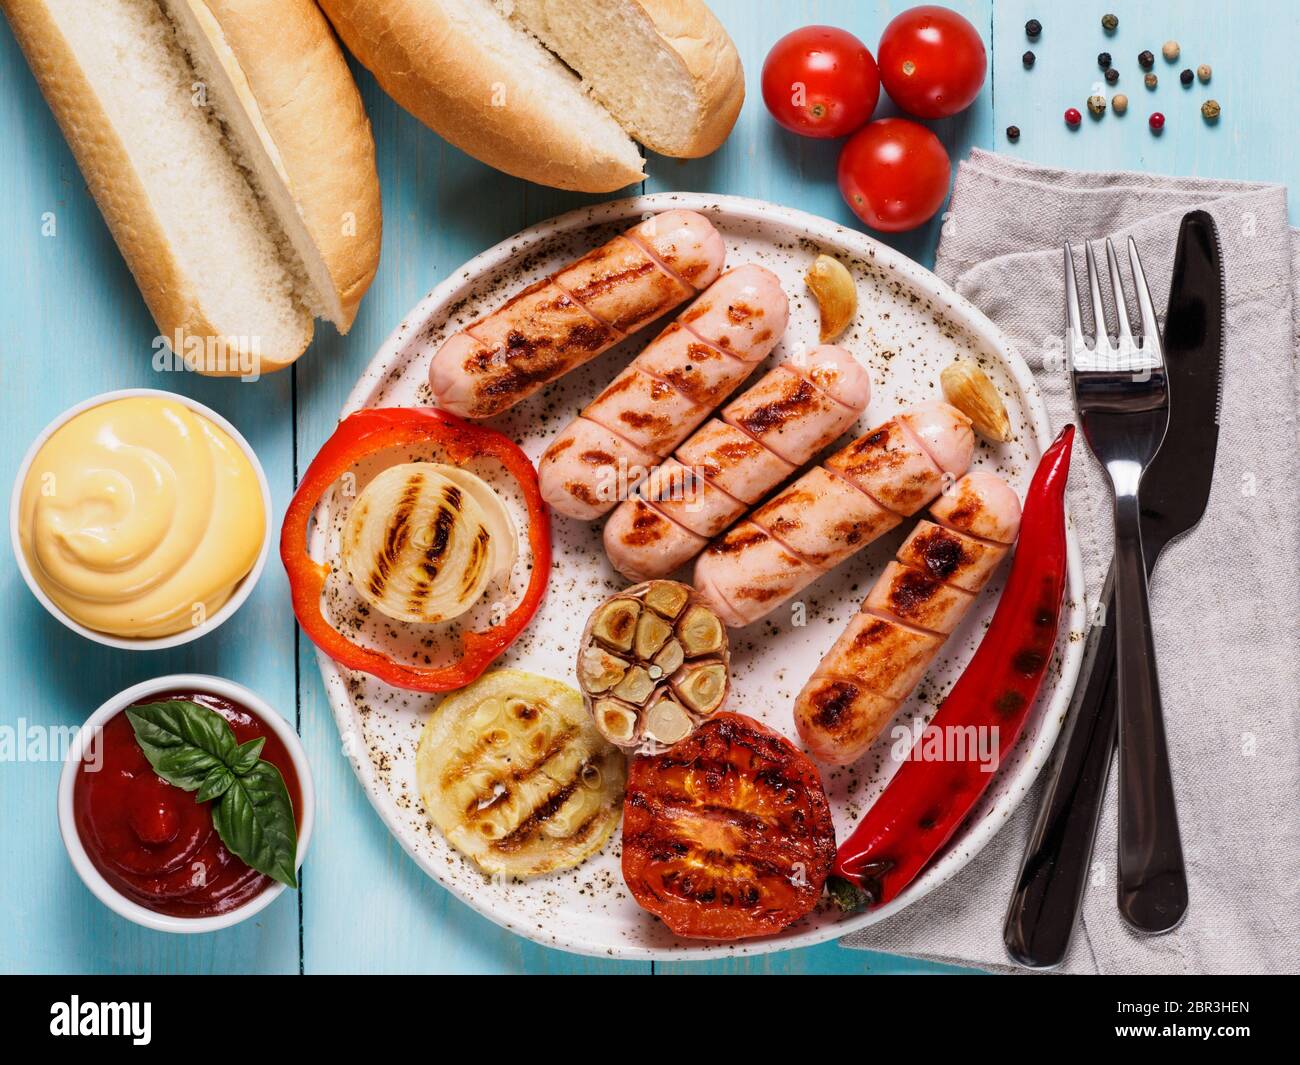 Page 3 - Hotdog Buns High Resolution Stock Photography and Images - Alamy